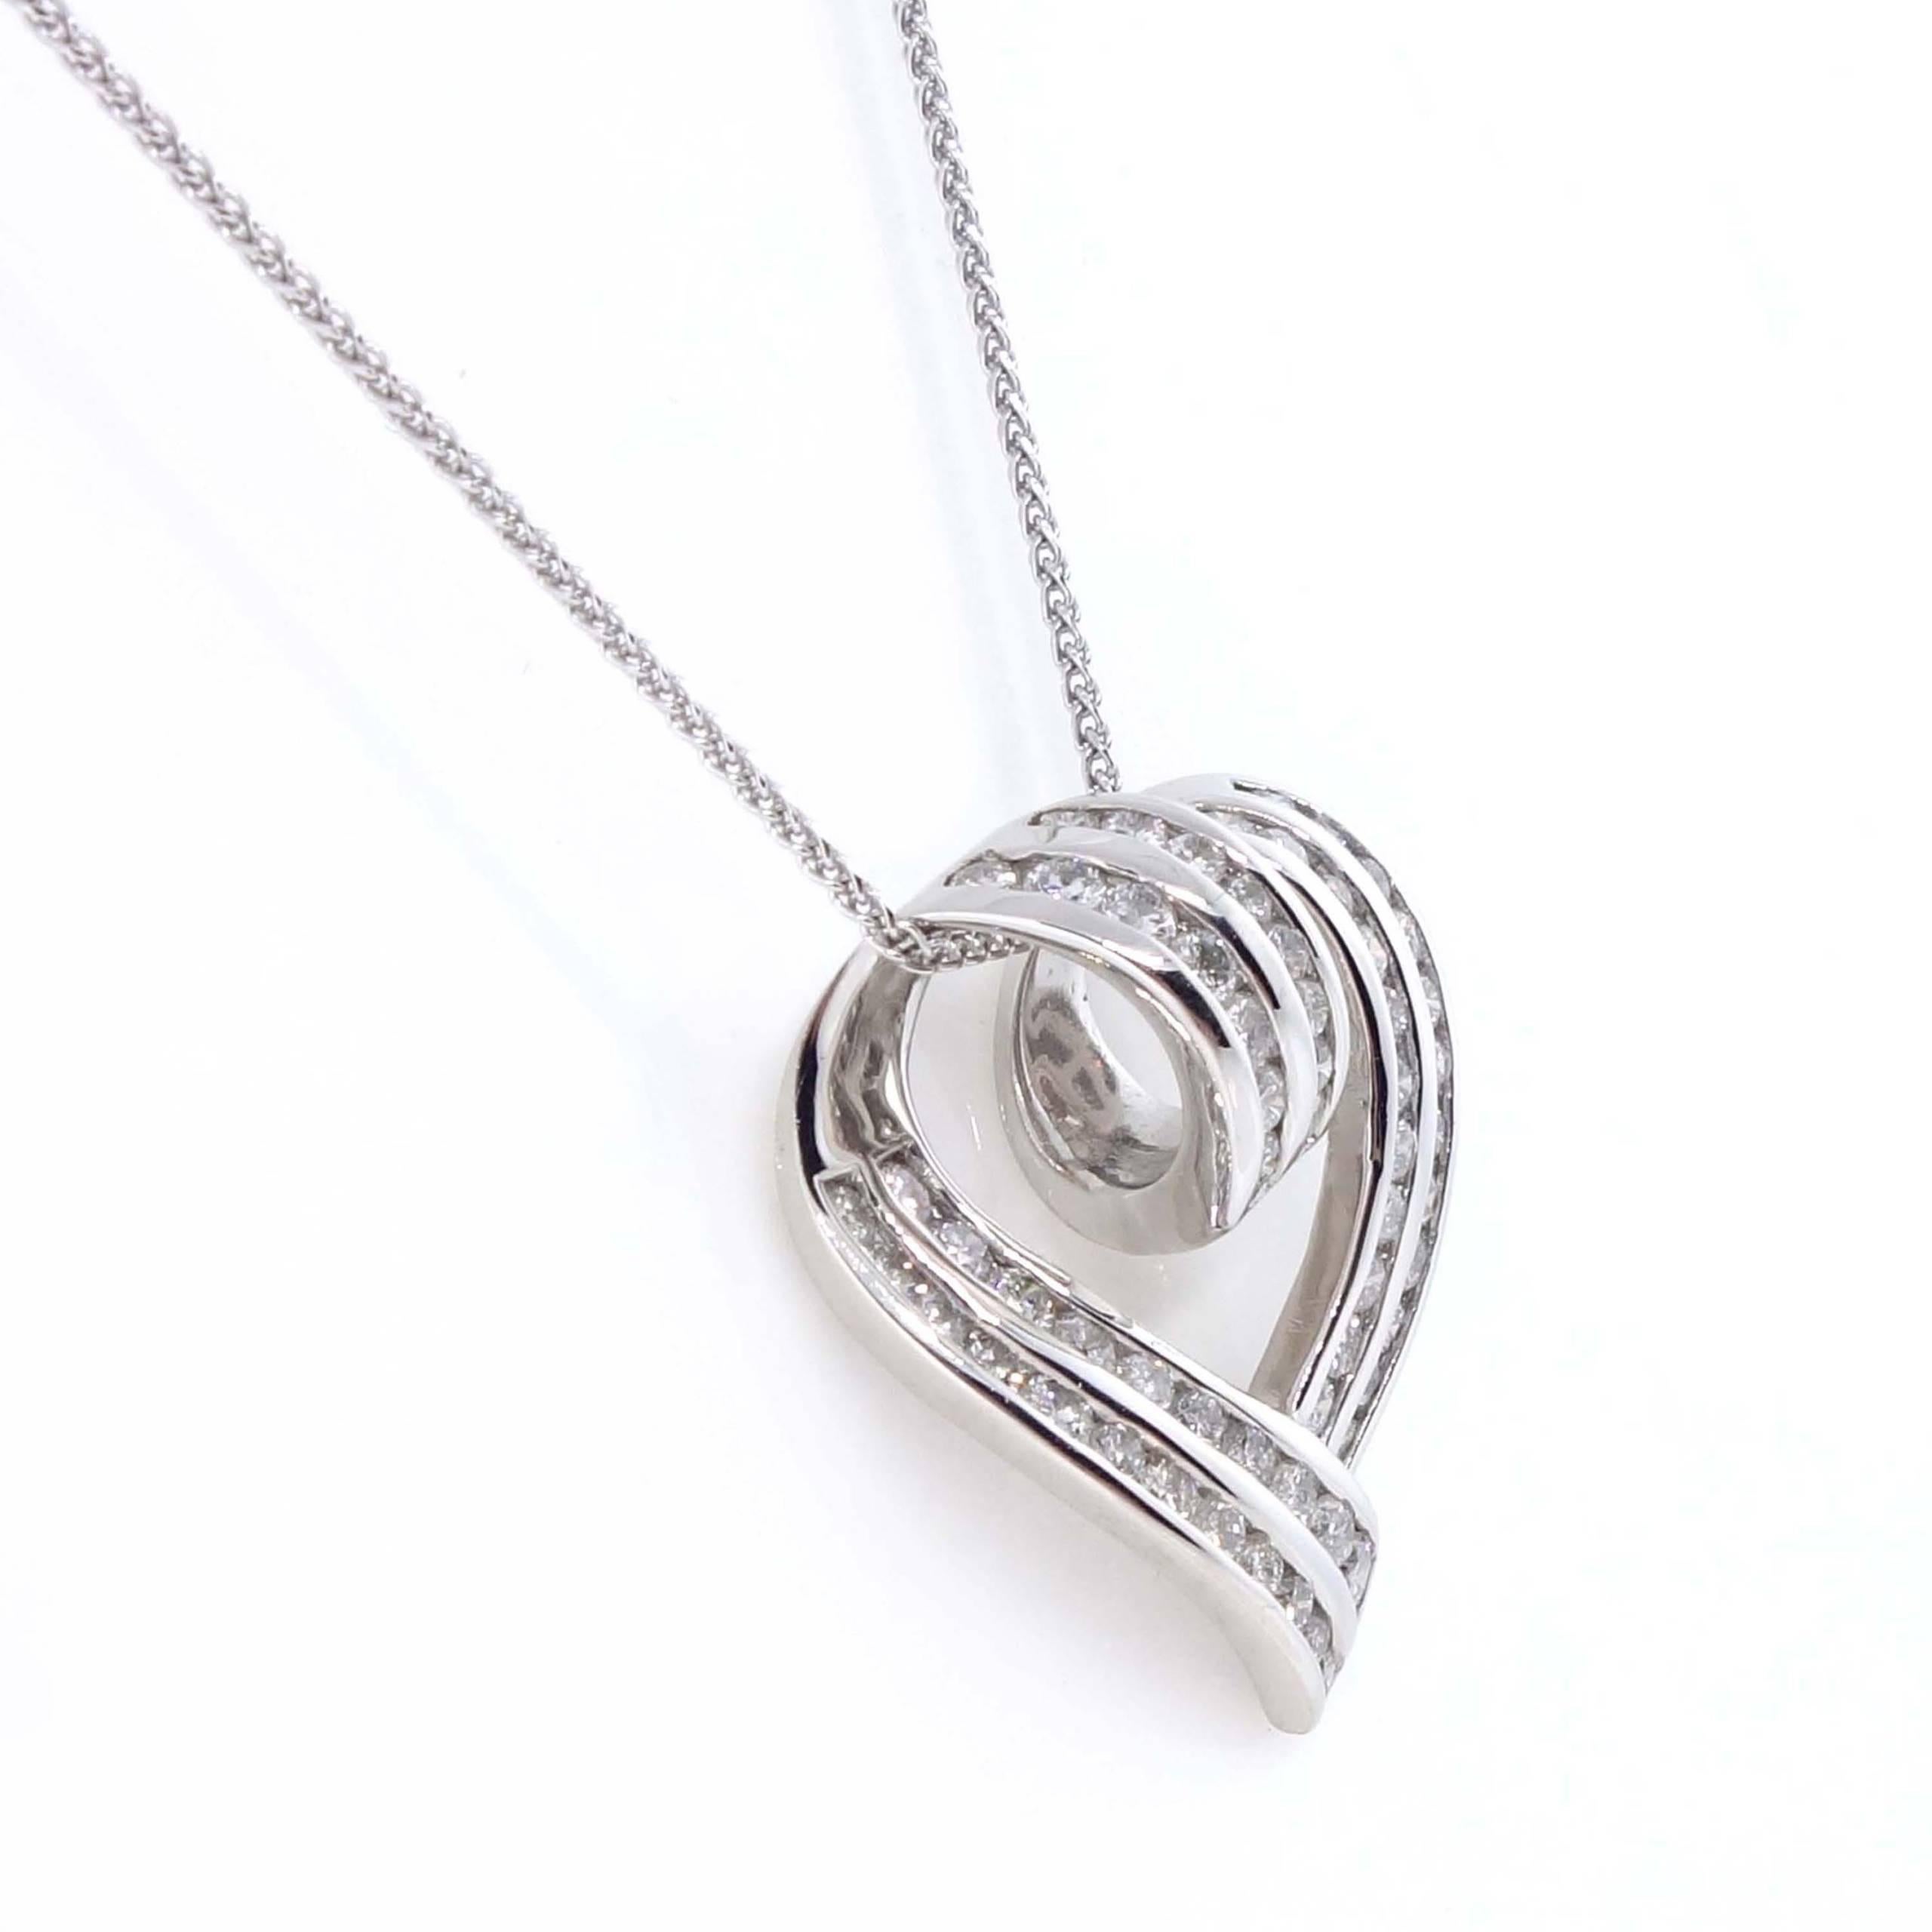 Heart pendant containing 60 round brilliant cut diamonds of about 1.05 carats with a clarity of SI2 and color H. All diamonds are set in a14k yellow gold pendant. The total weight of the pendant is approximately 6.88 grams.

Measurements: W 0.80 x H